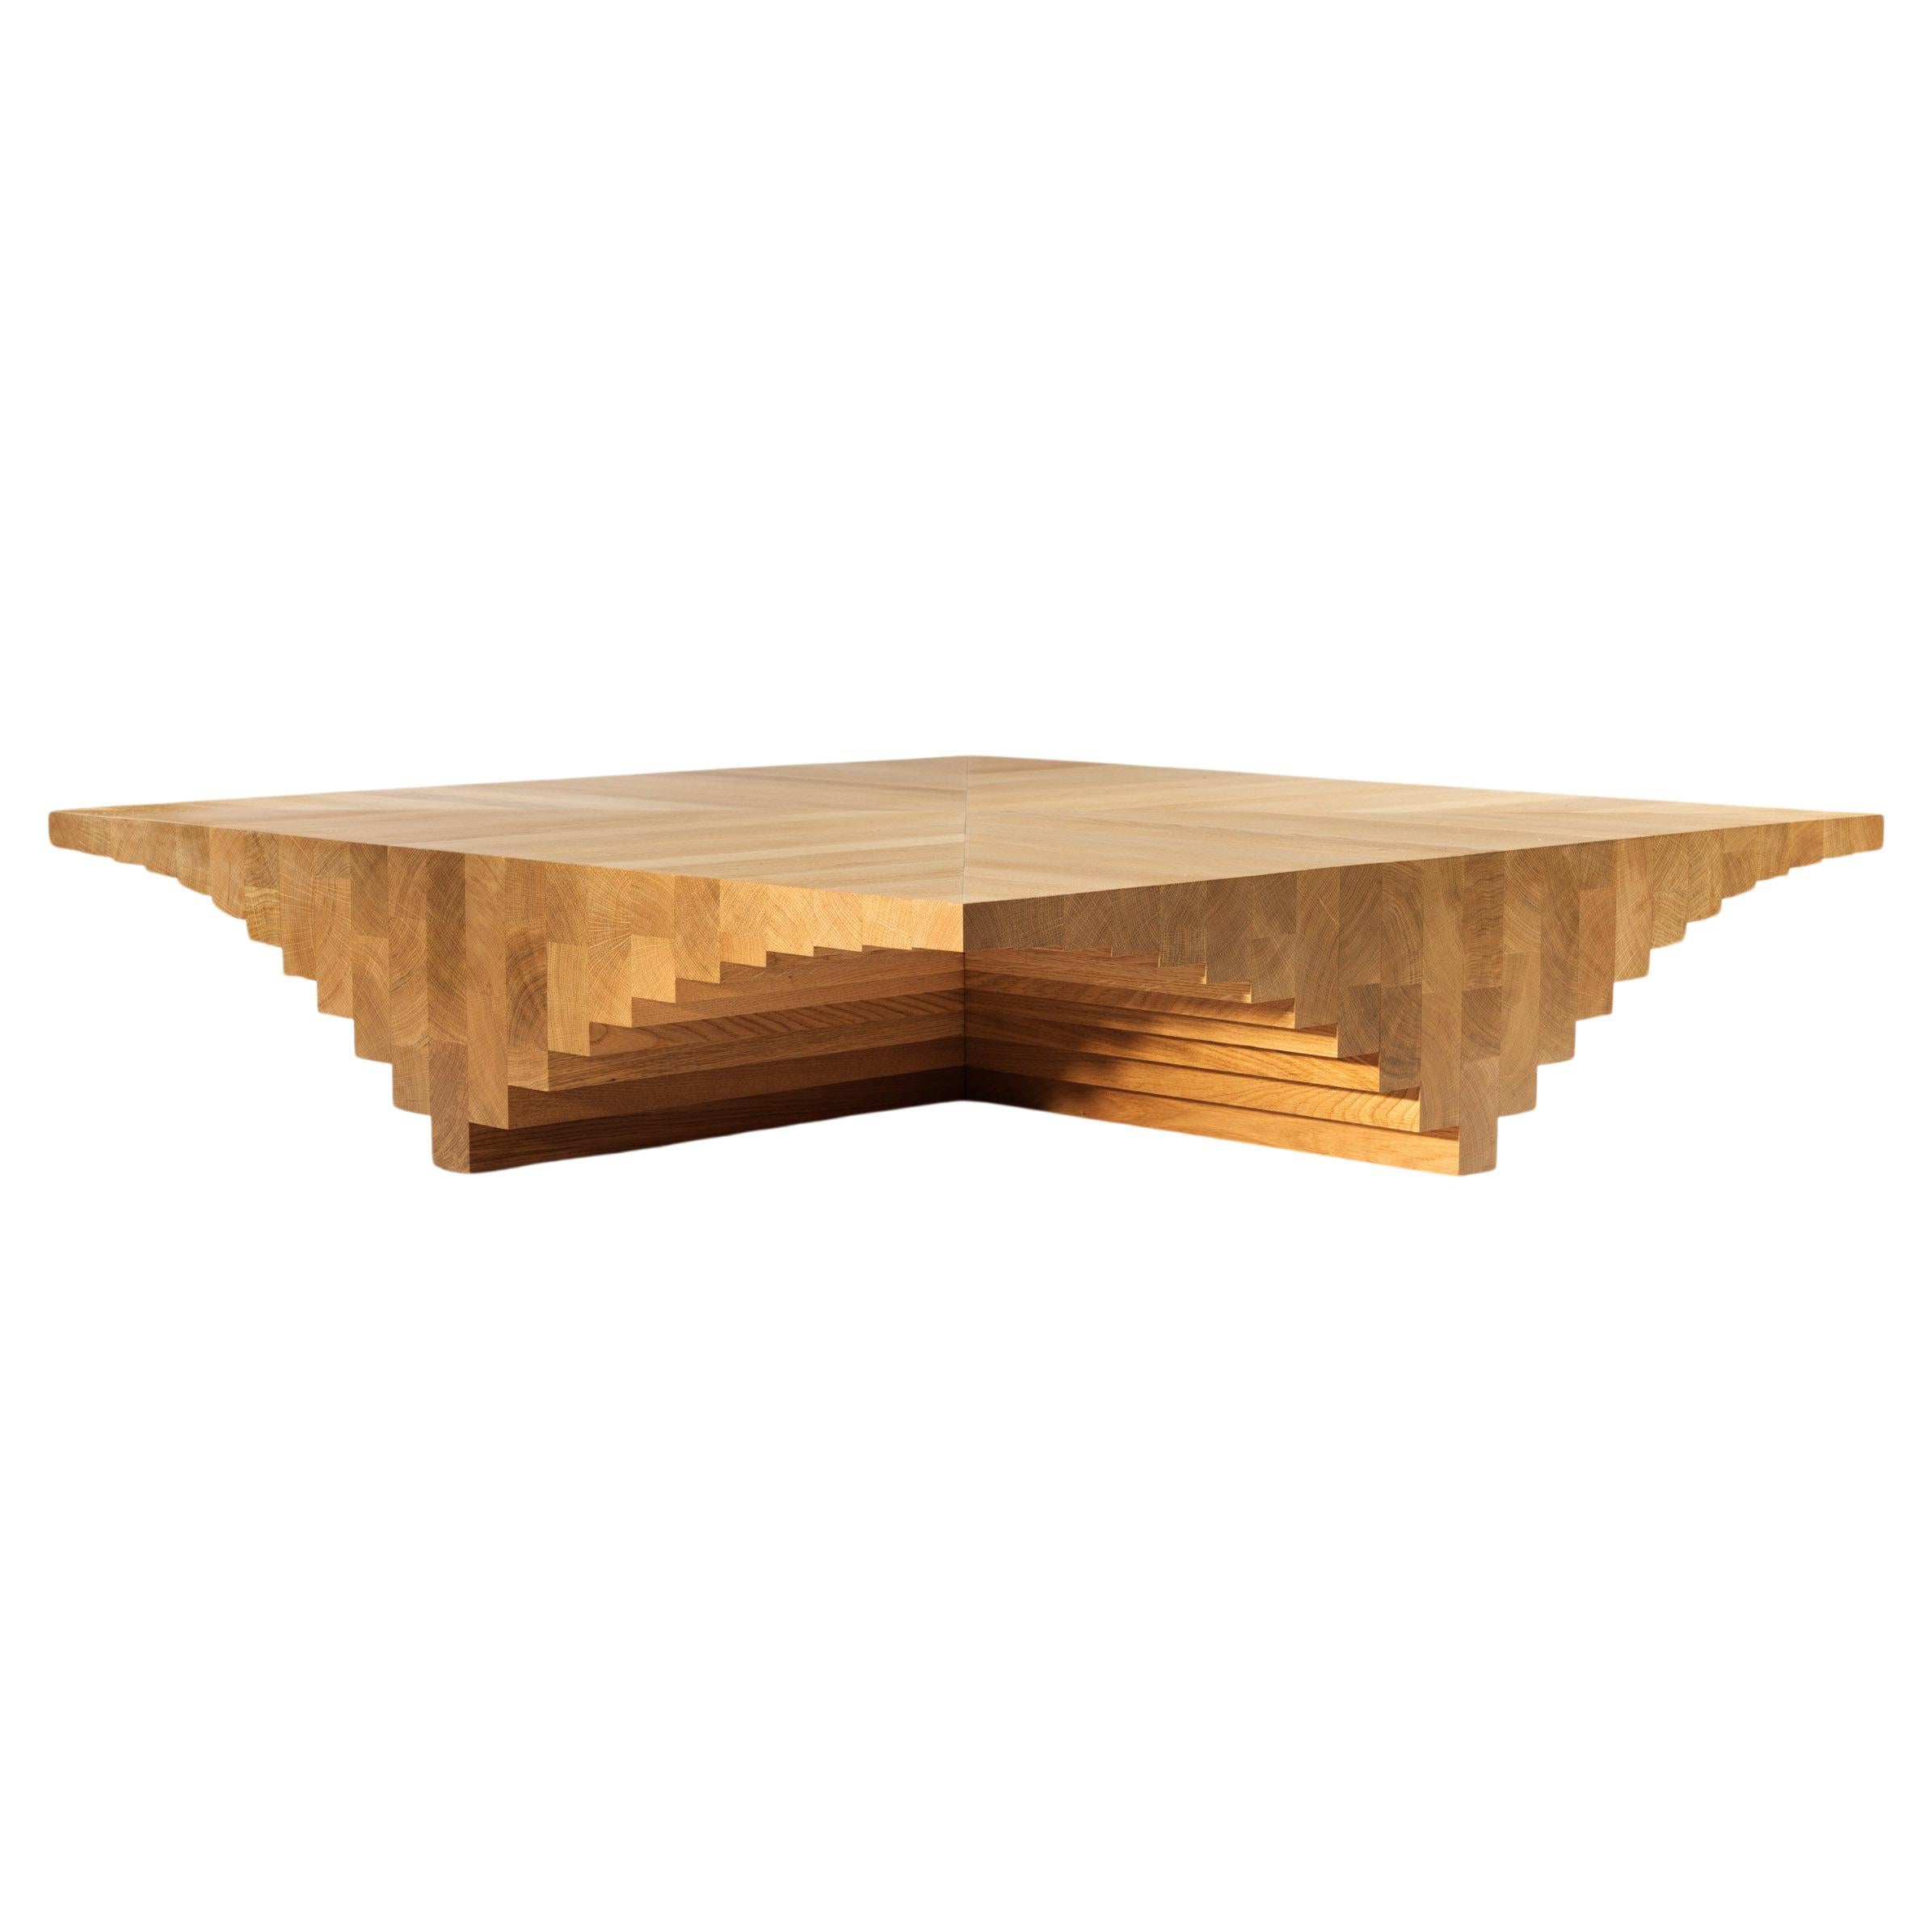 Brown solid oak ater coffee table by Tim Vranken For Sale